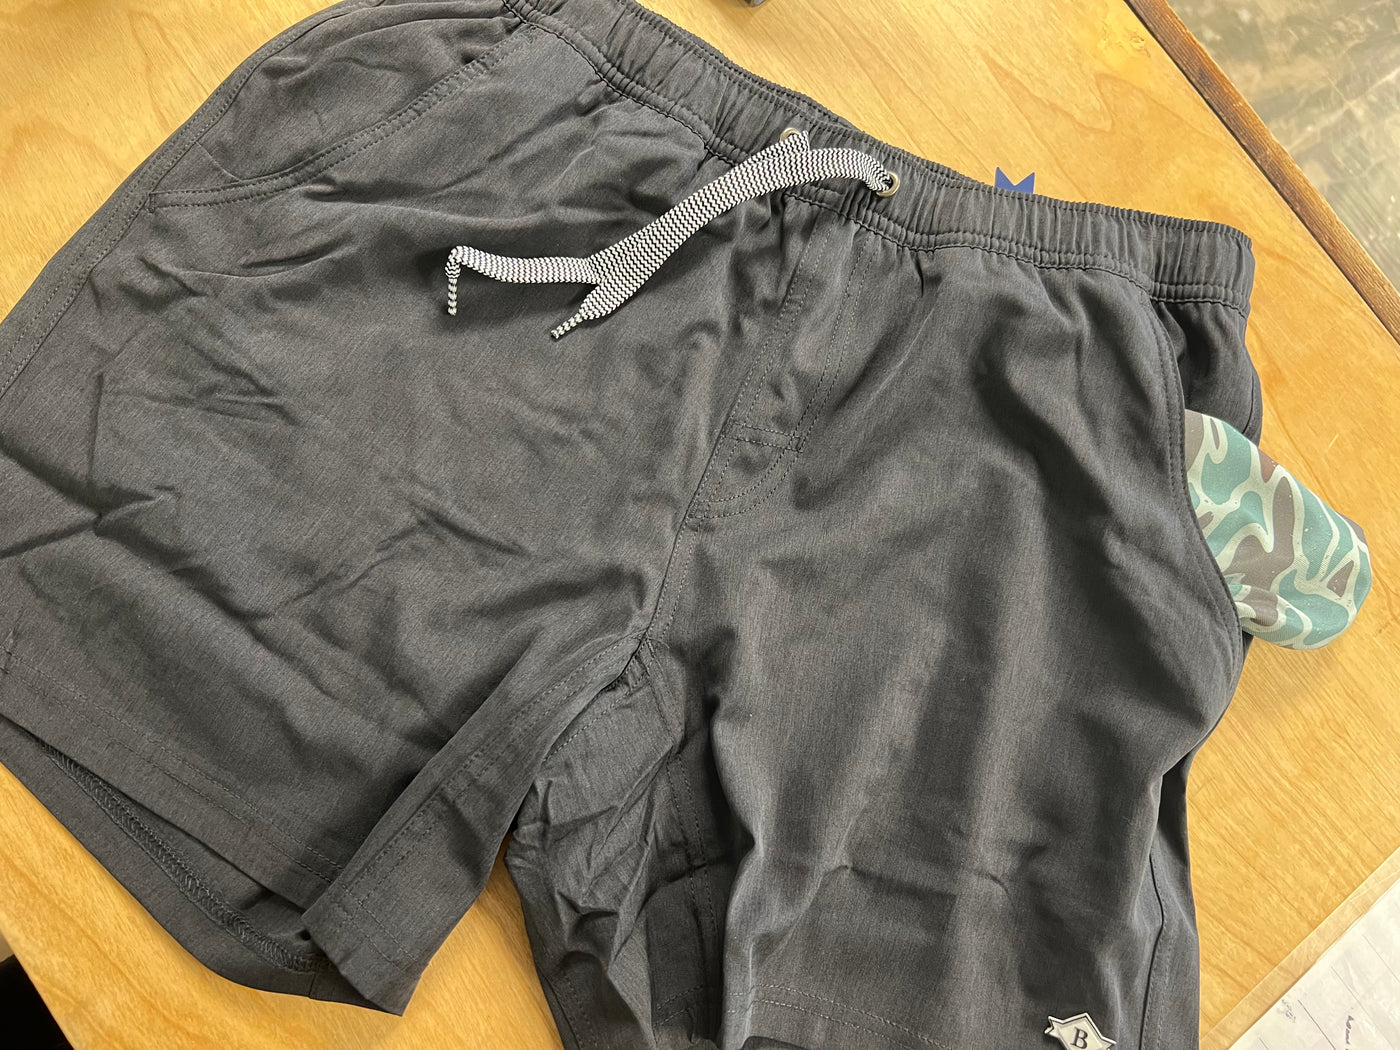 Black Athletic Shorts with Camo Lining